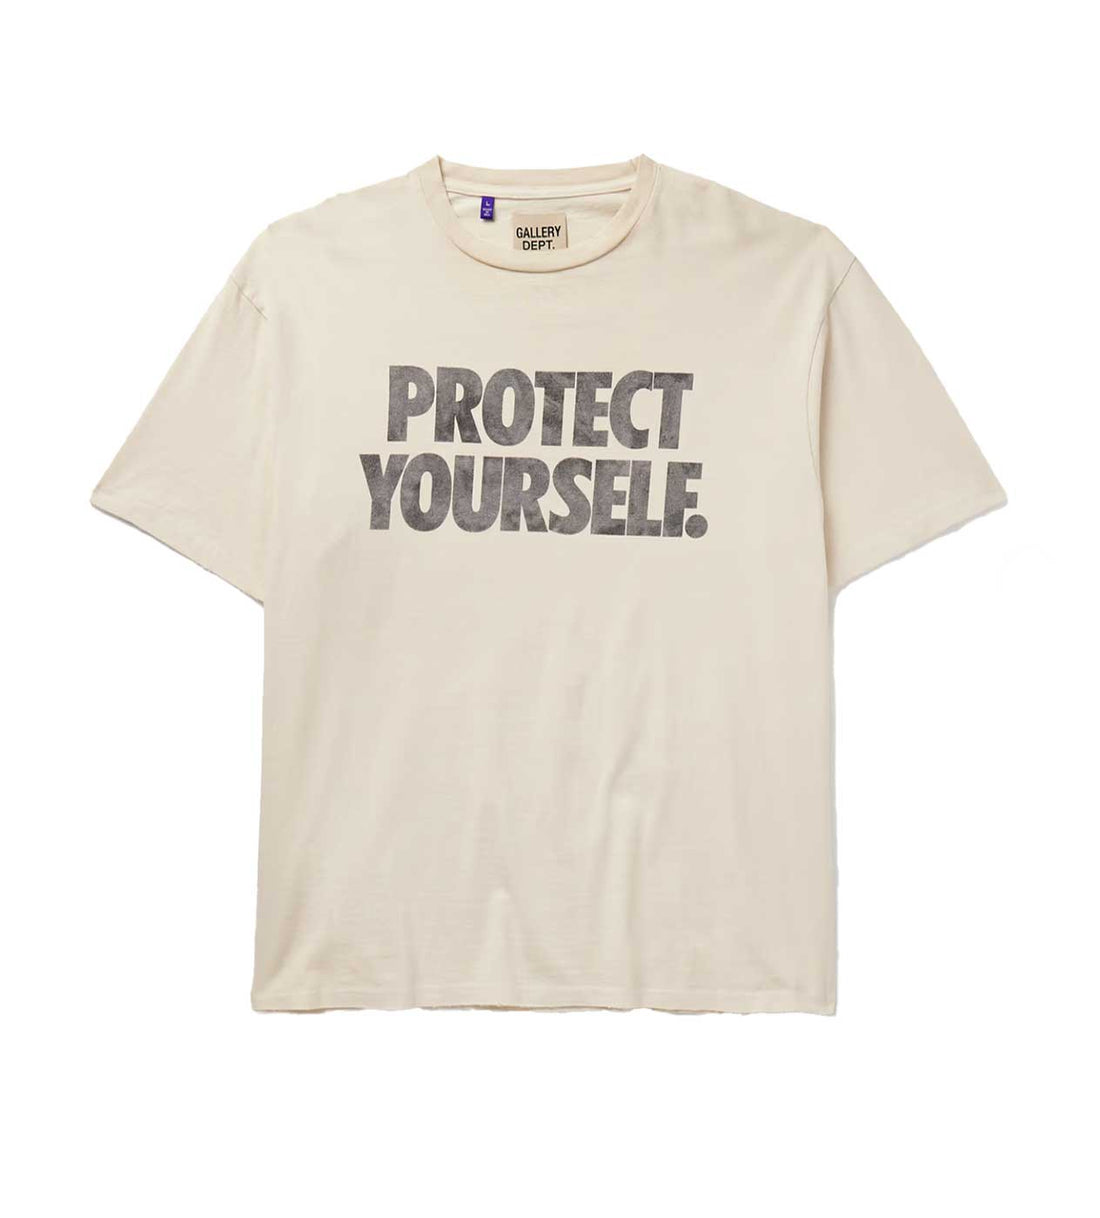 Gallery Dept. Protect Yourself Tee Front